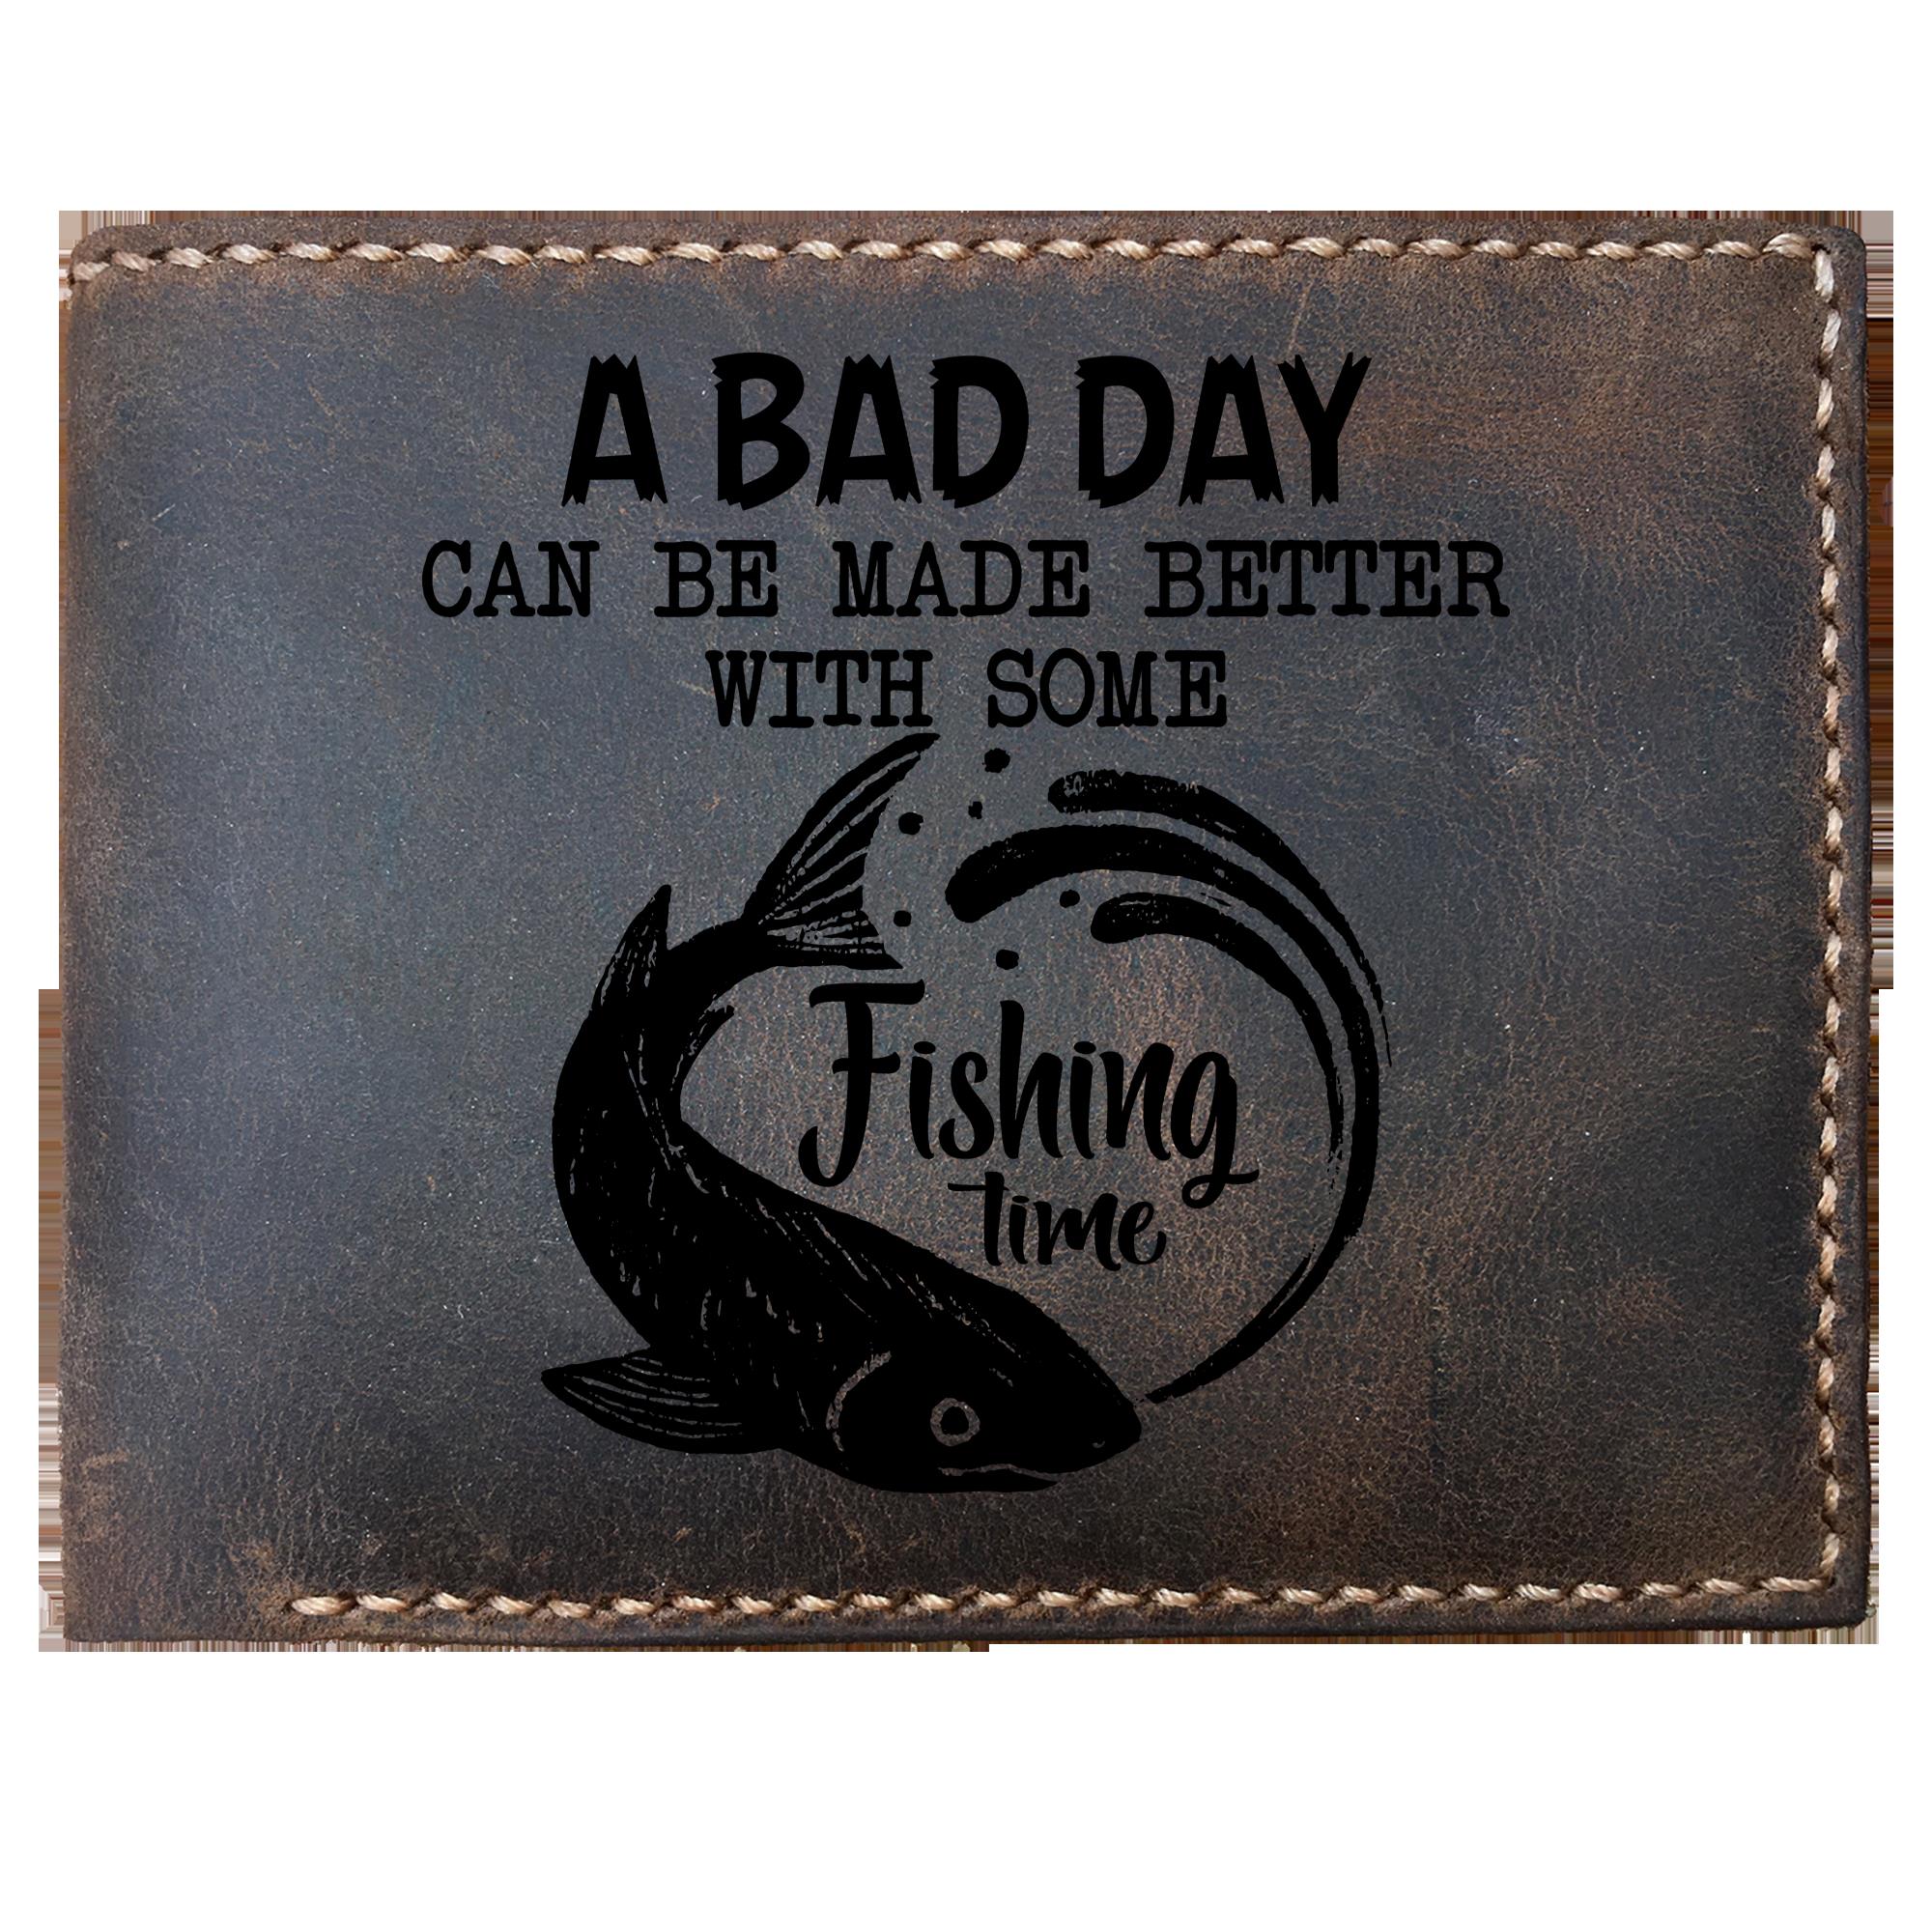 Skitongifts Funny Custom Laser Engraved Bifold Leather Wallet For Men, Copy Of B0967nt9yy-A Bad Day Can Be Made Better With Some Fishing Time